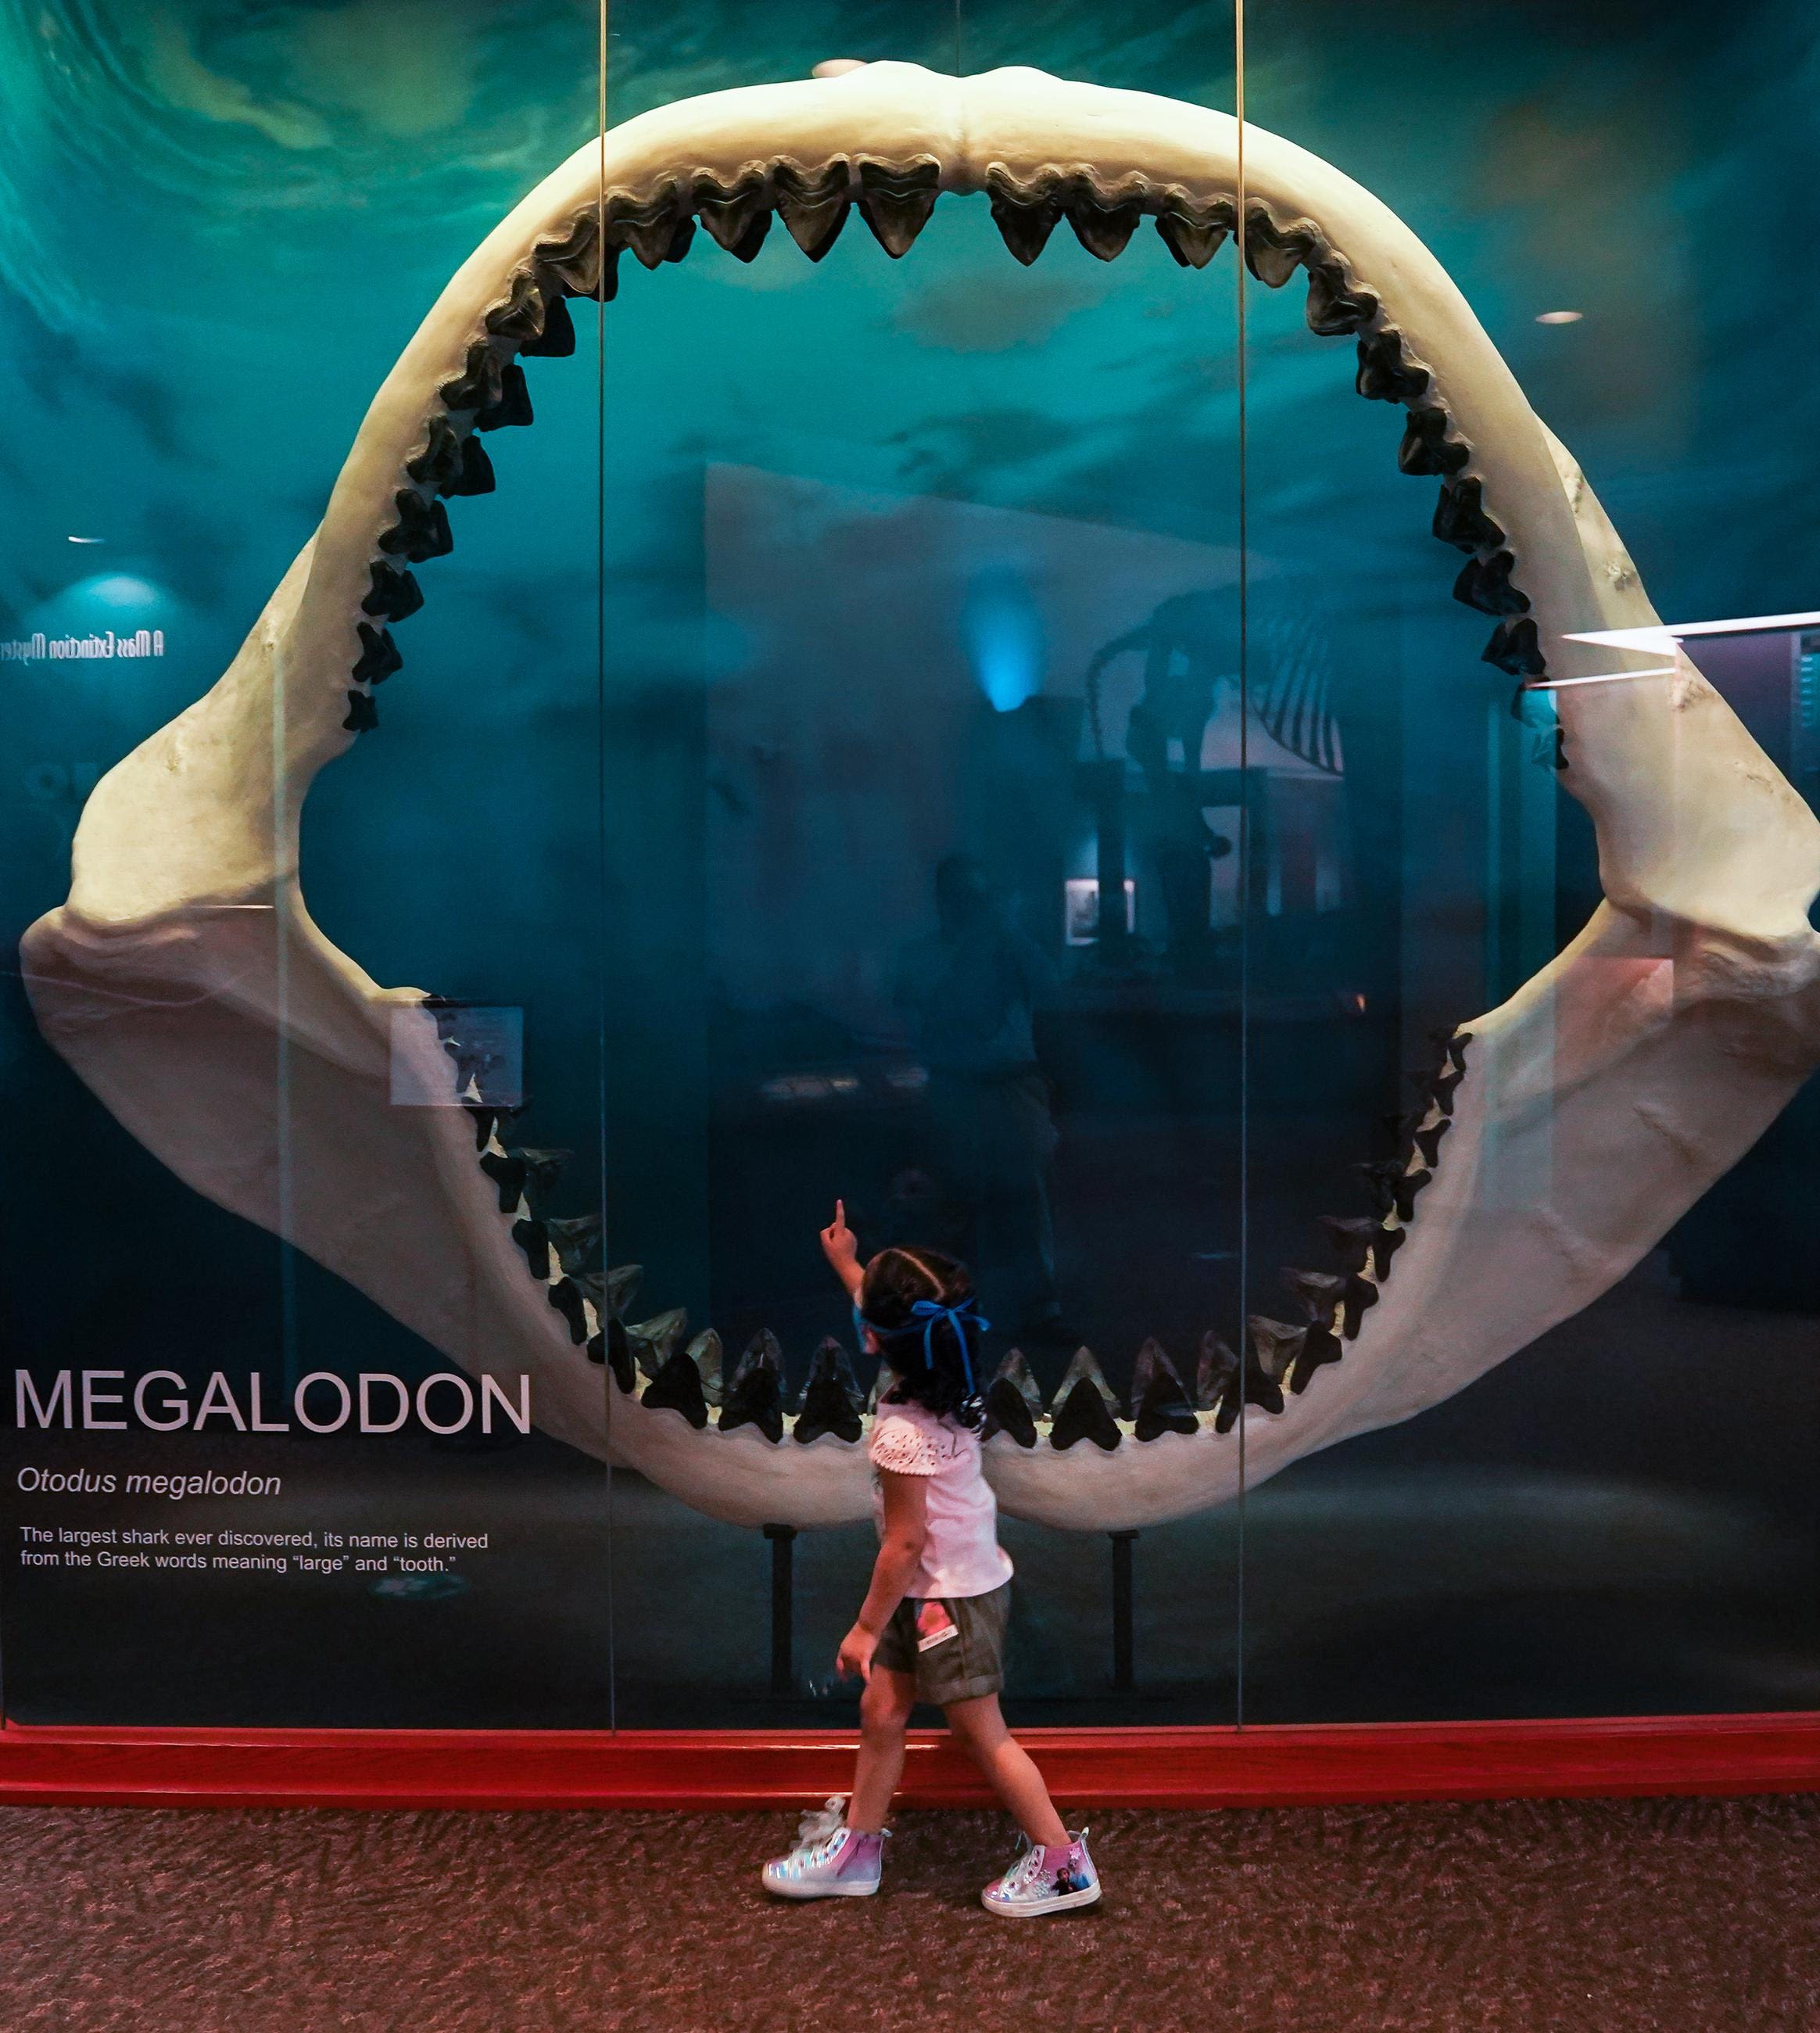 Search for megalodon, shark teeth at NC beaches Memorial Day weekend: Best places to find them